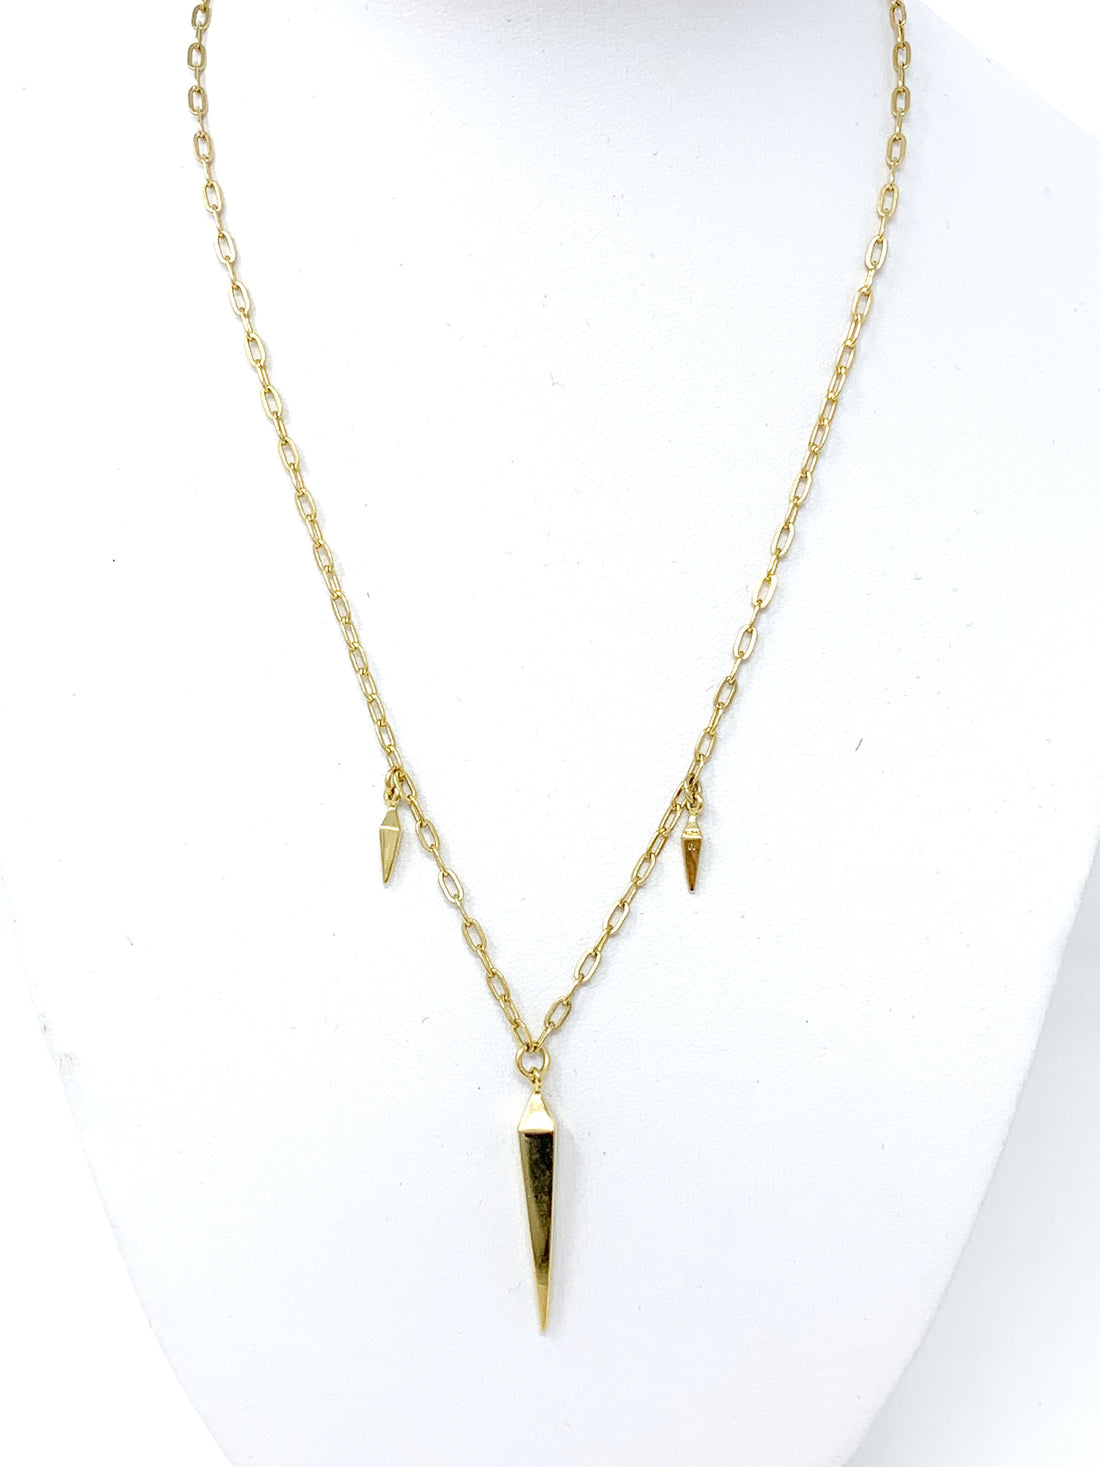 Triple Spike Necklace in Gold